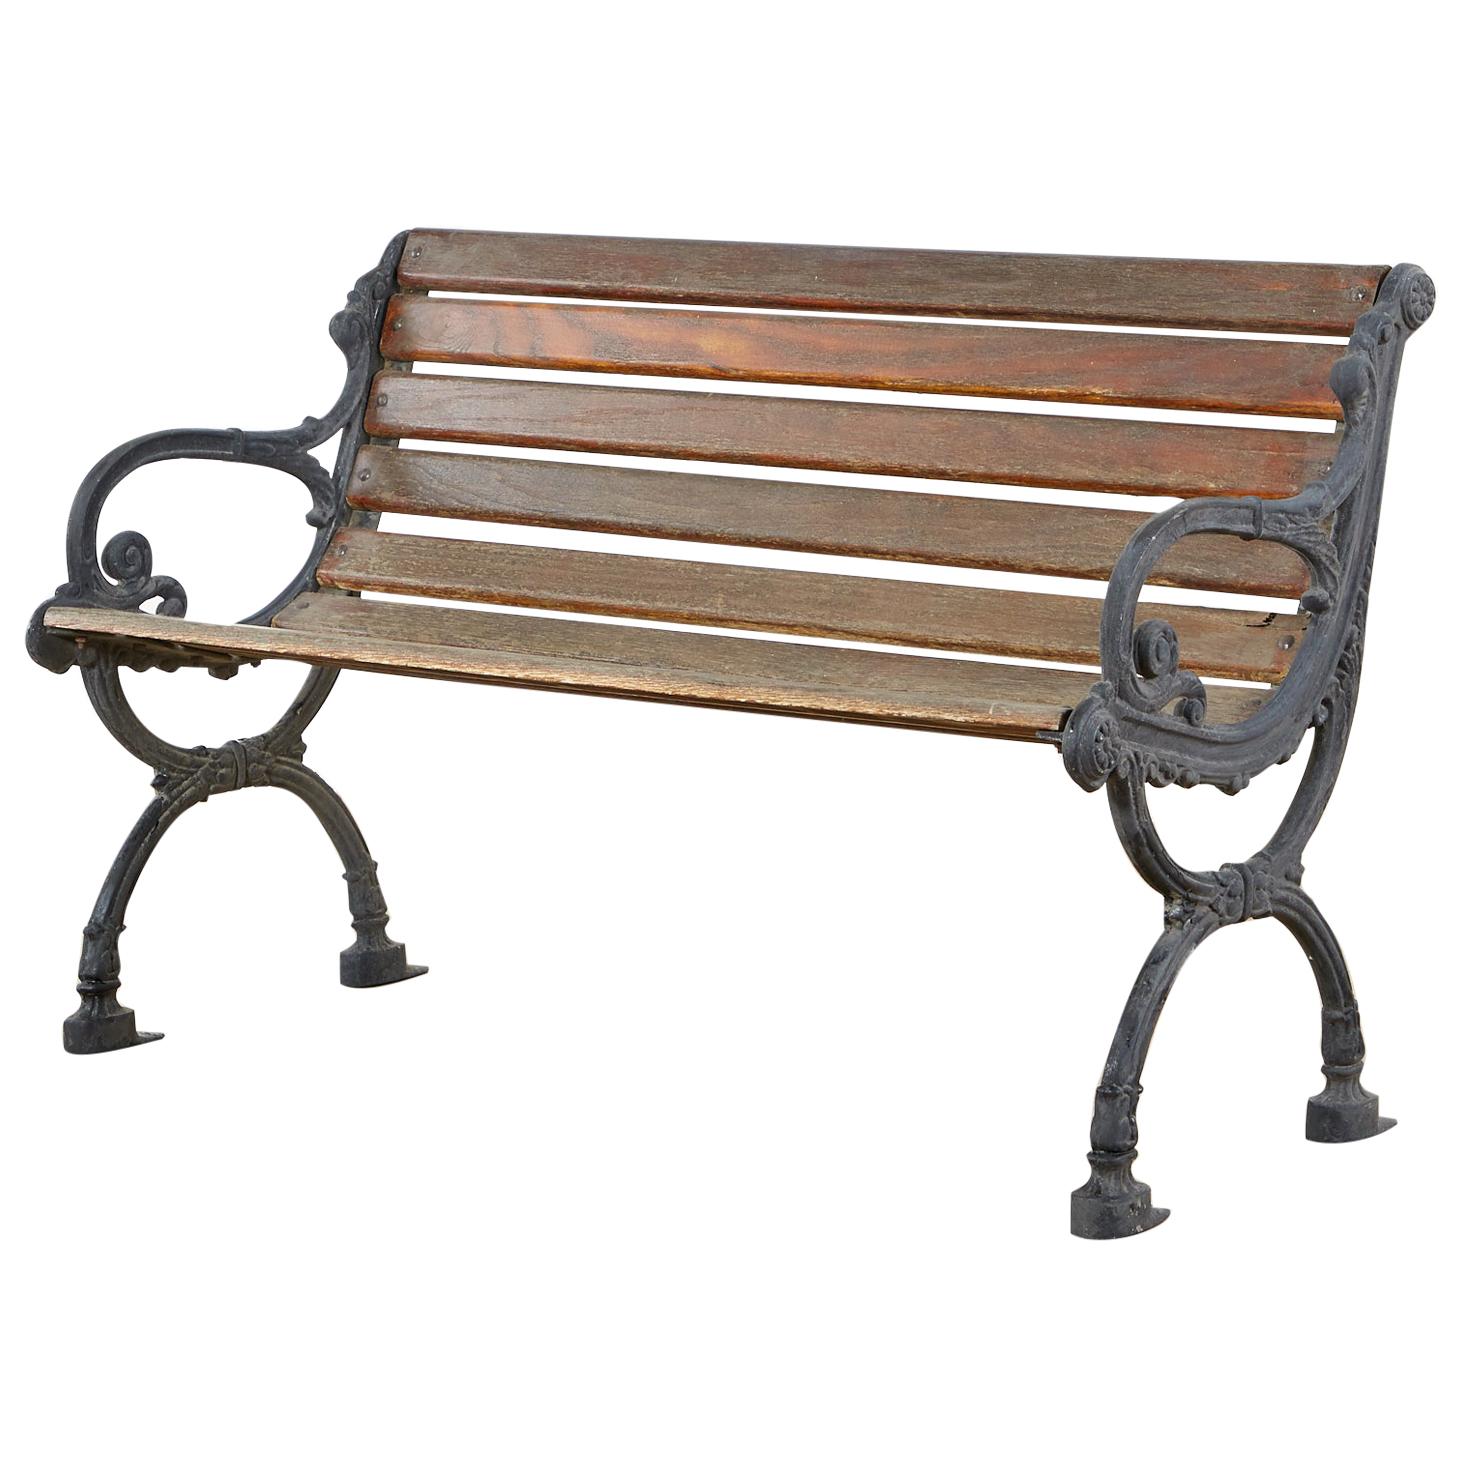 Used benches - BENCHES